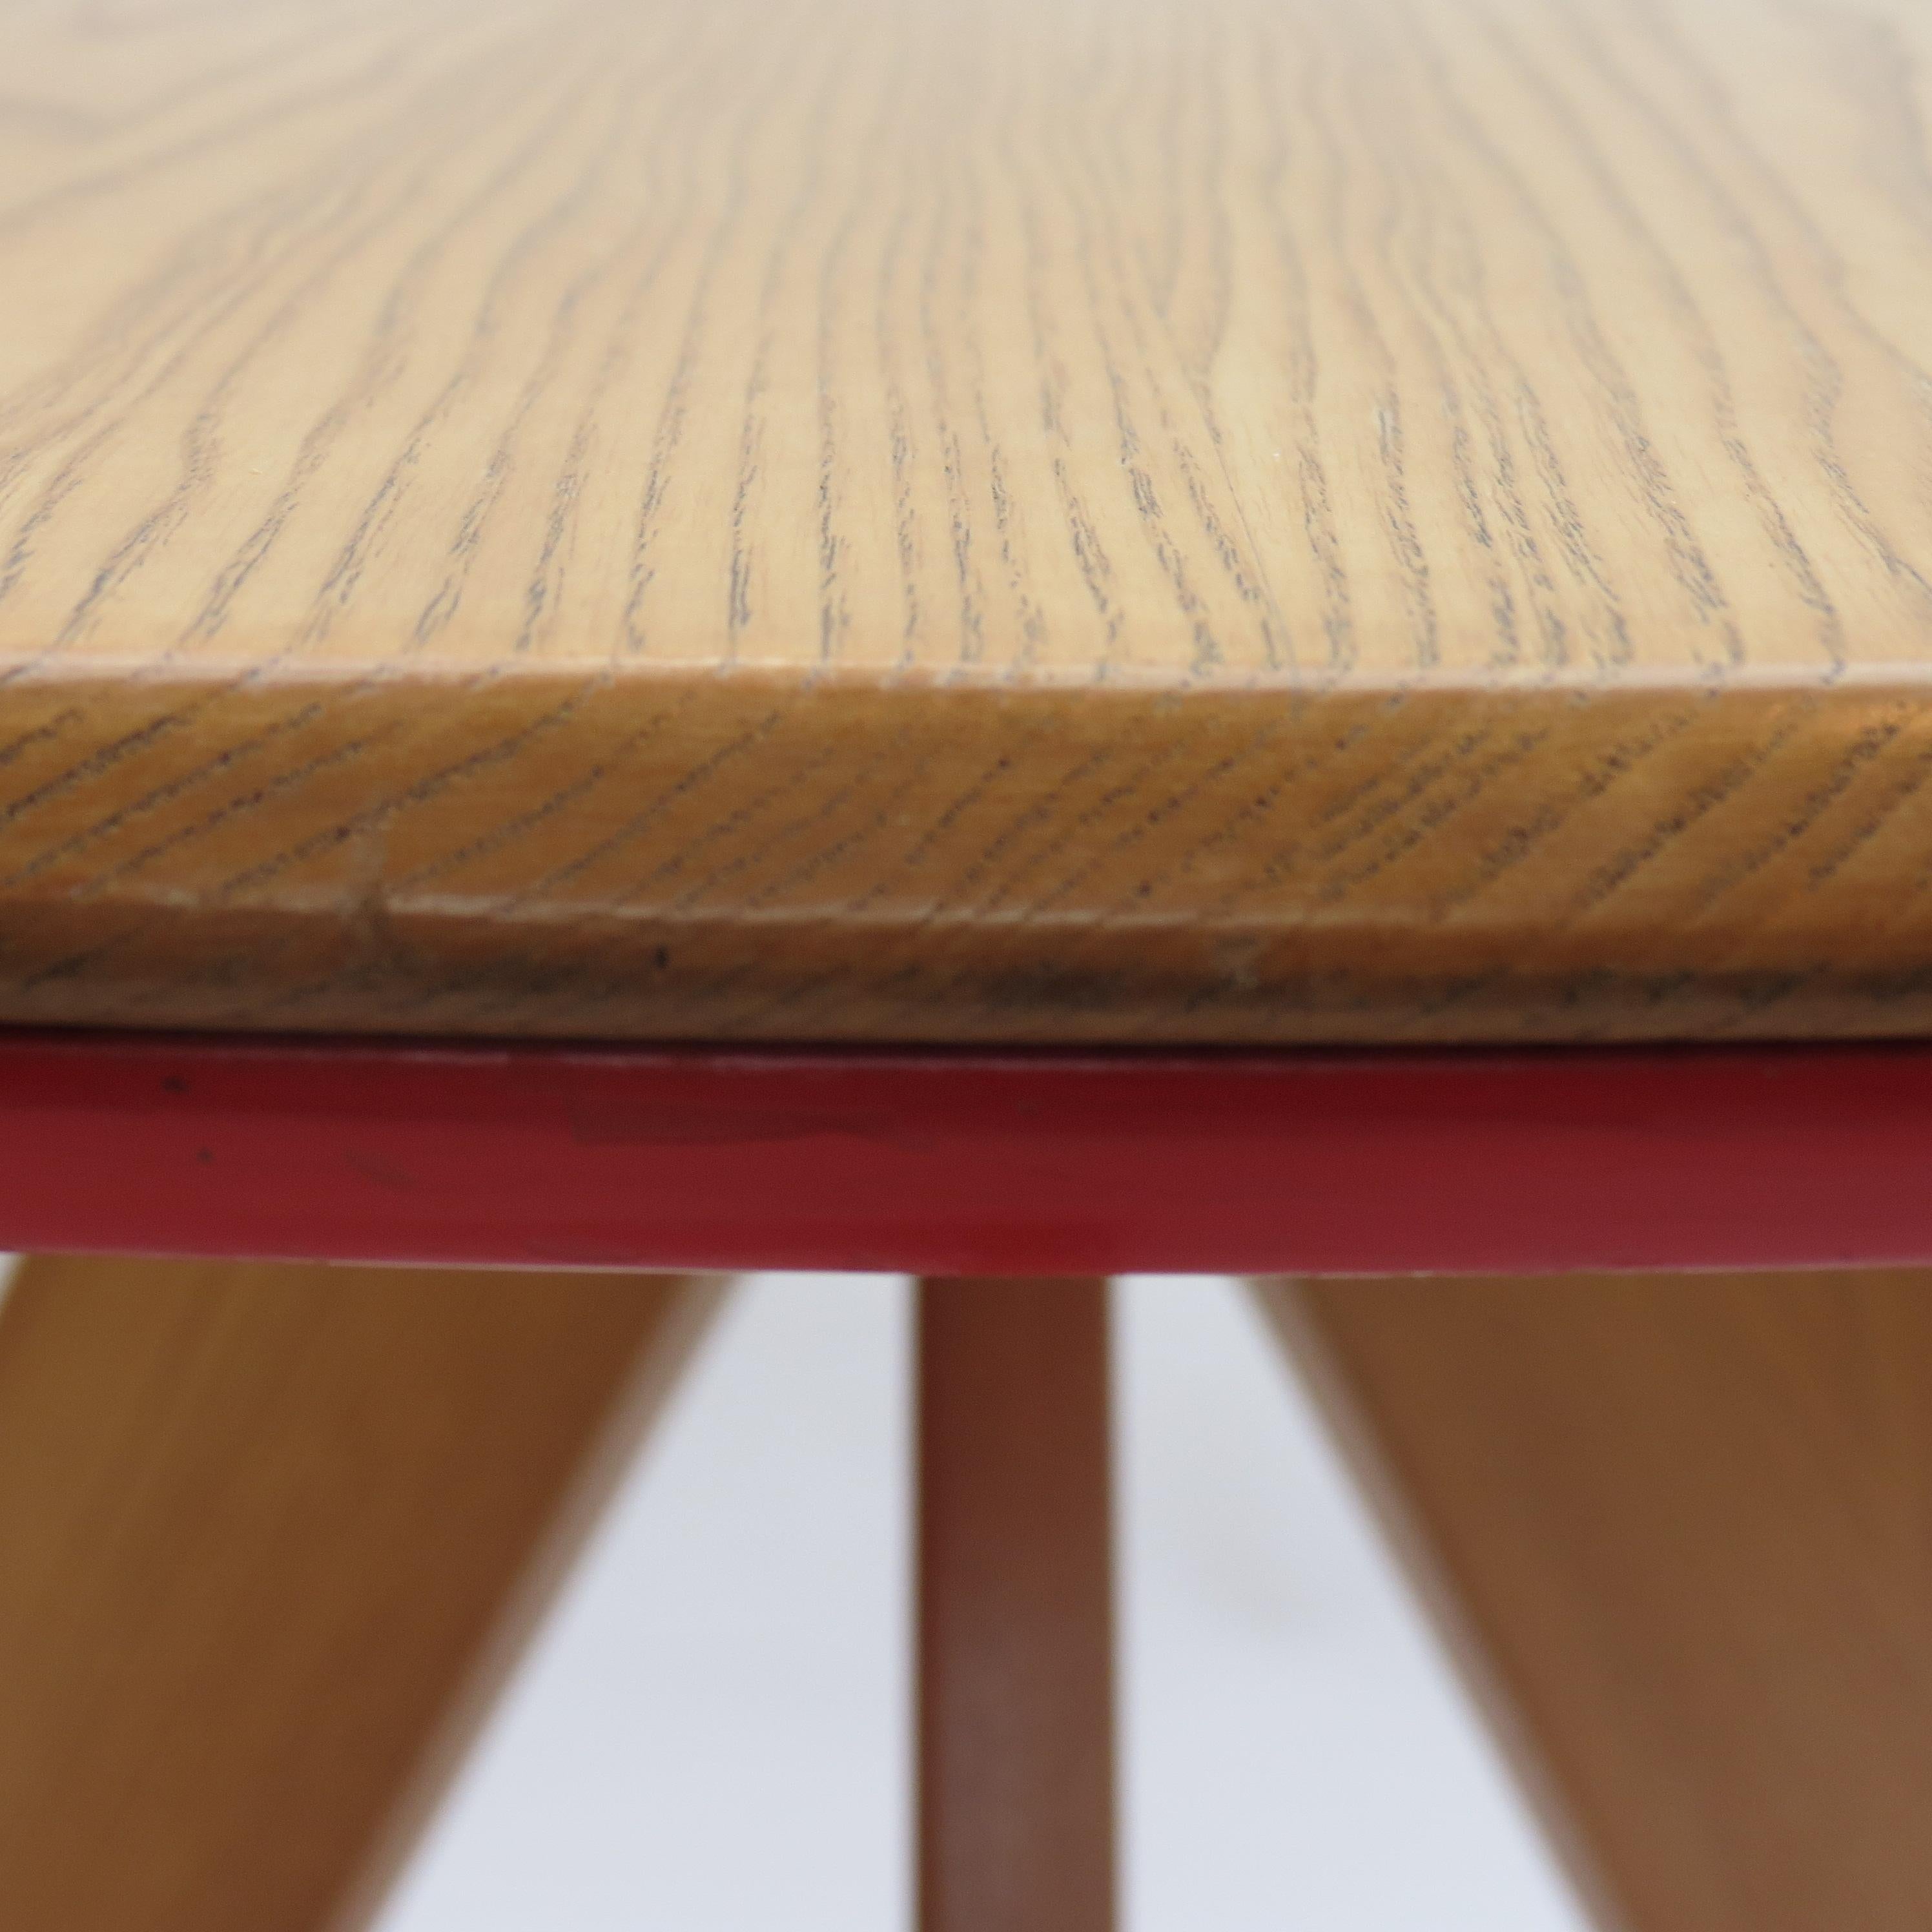 Midcentury Bespoke Circular Ash Dining Table by David Field 1980s with Red Blue 6